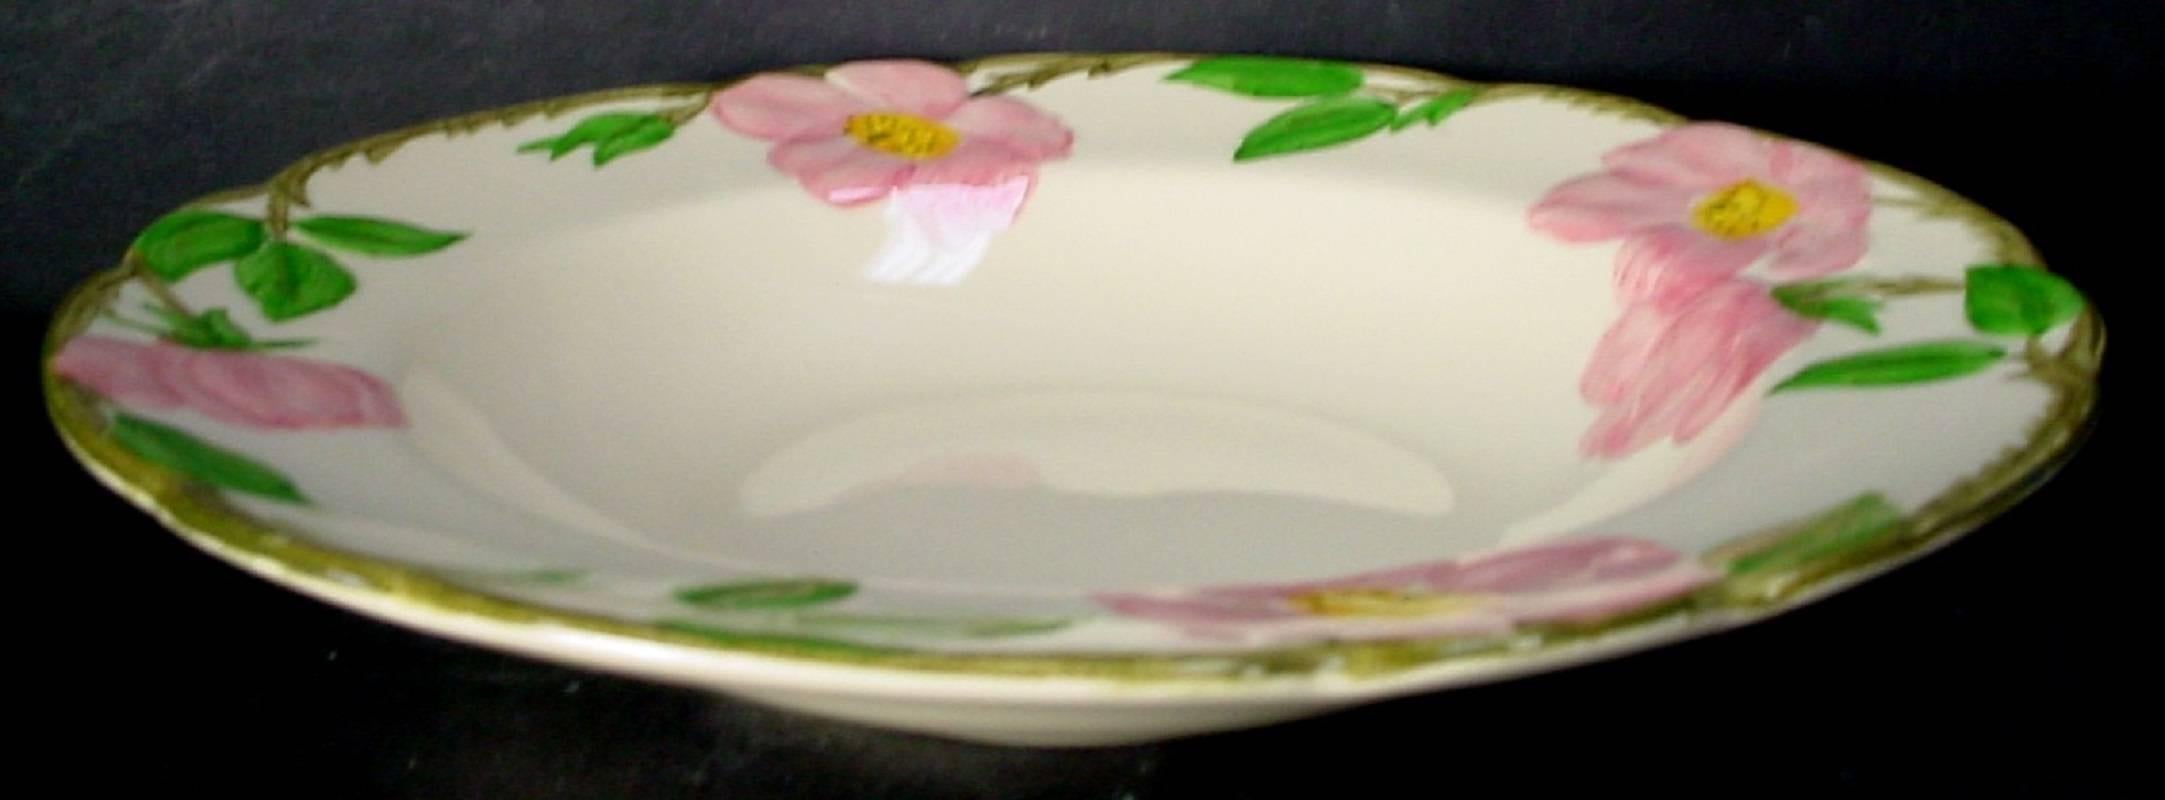 Franciscan China Desert Rose USA pattern 65-piece luncheon set service for 12

in great condition free-from chips, cracks, breaks or stains and show minimal wear.

• Made under a wide variety of backstamps. This is a mixed backstamp set but all